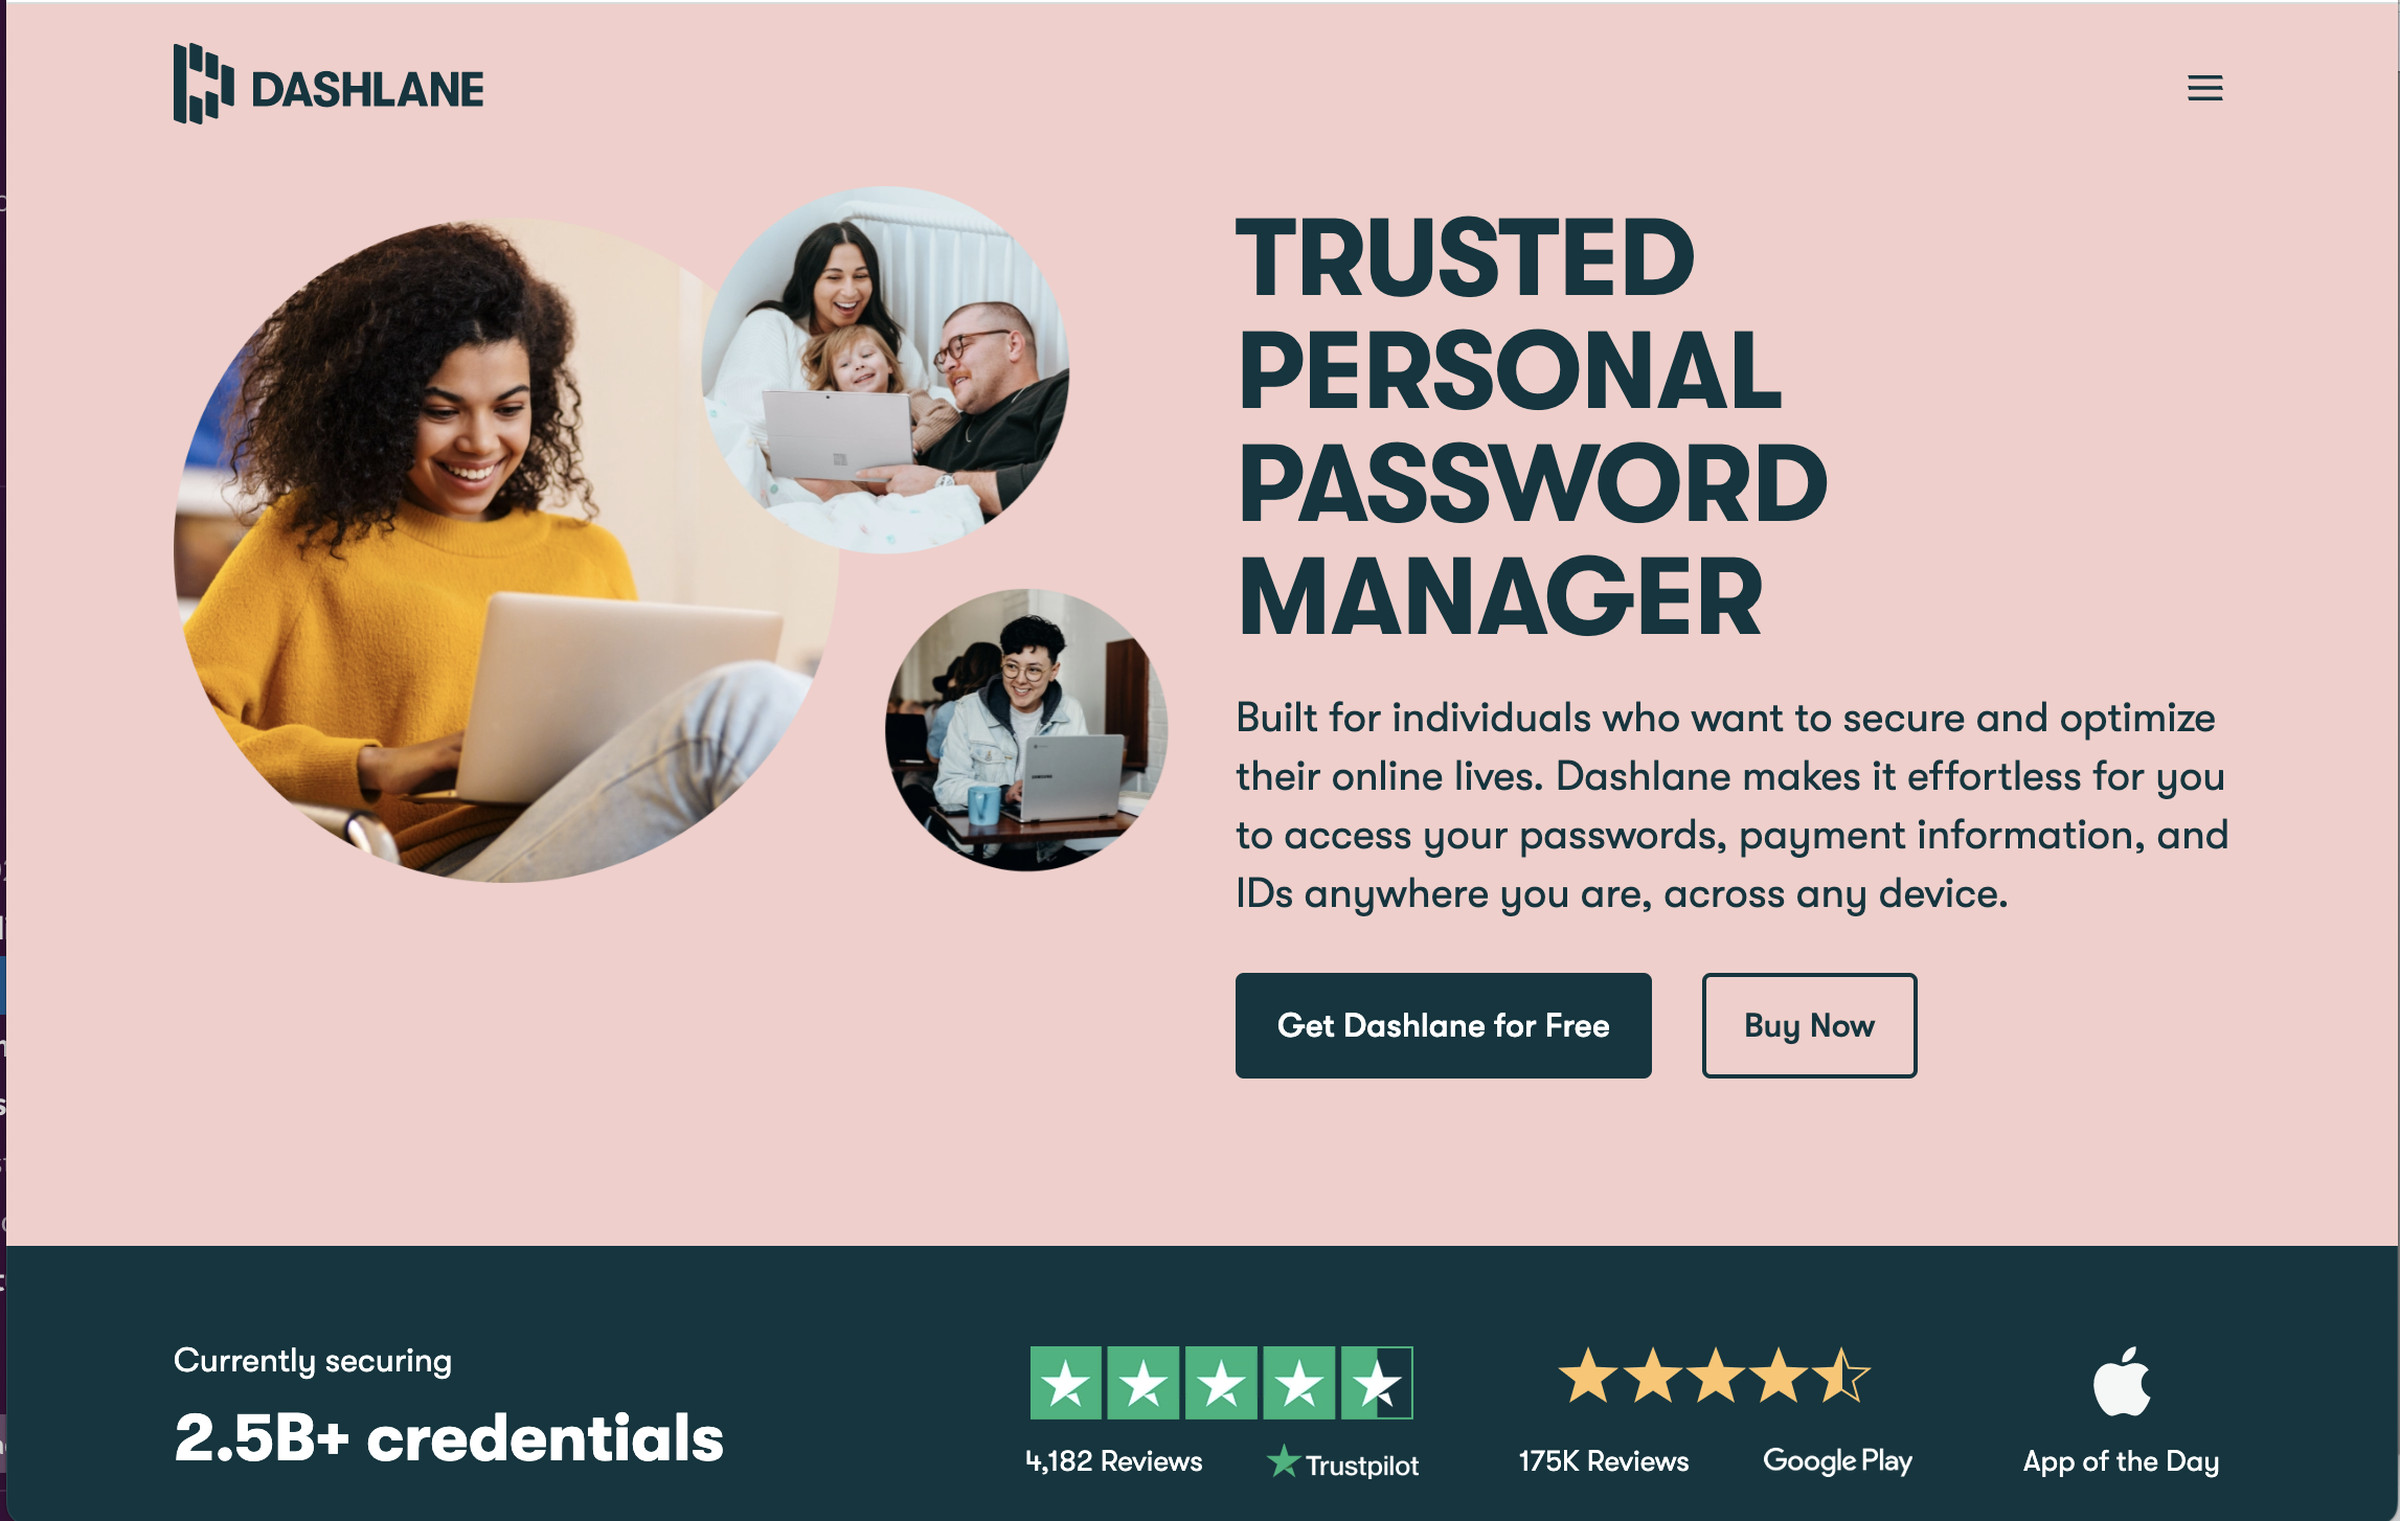 Web page for Dashlane password manager with the words “Trusted Personal Password Manager,” three photos of happy users, and buttons for information and to buy now.